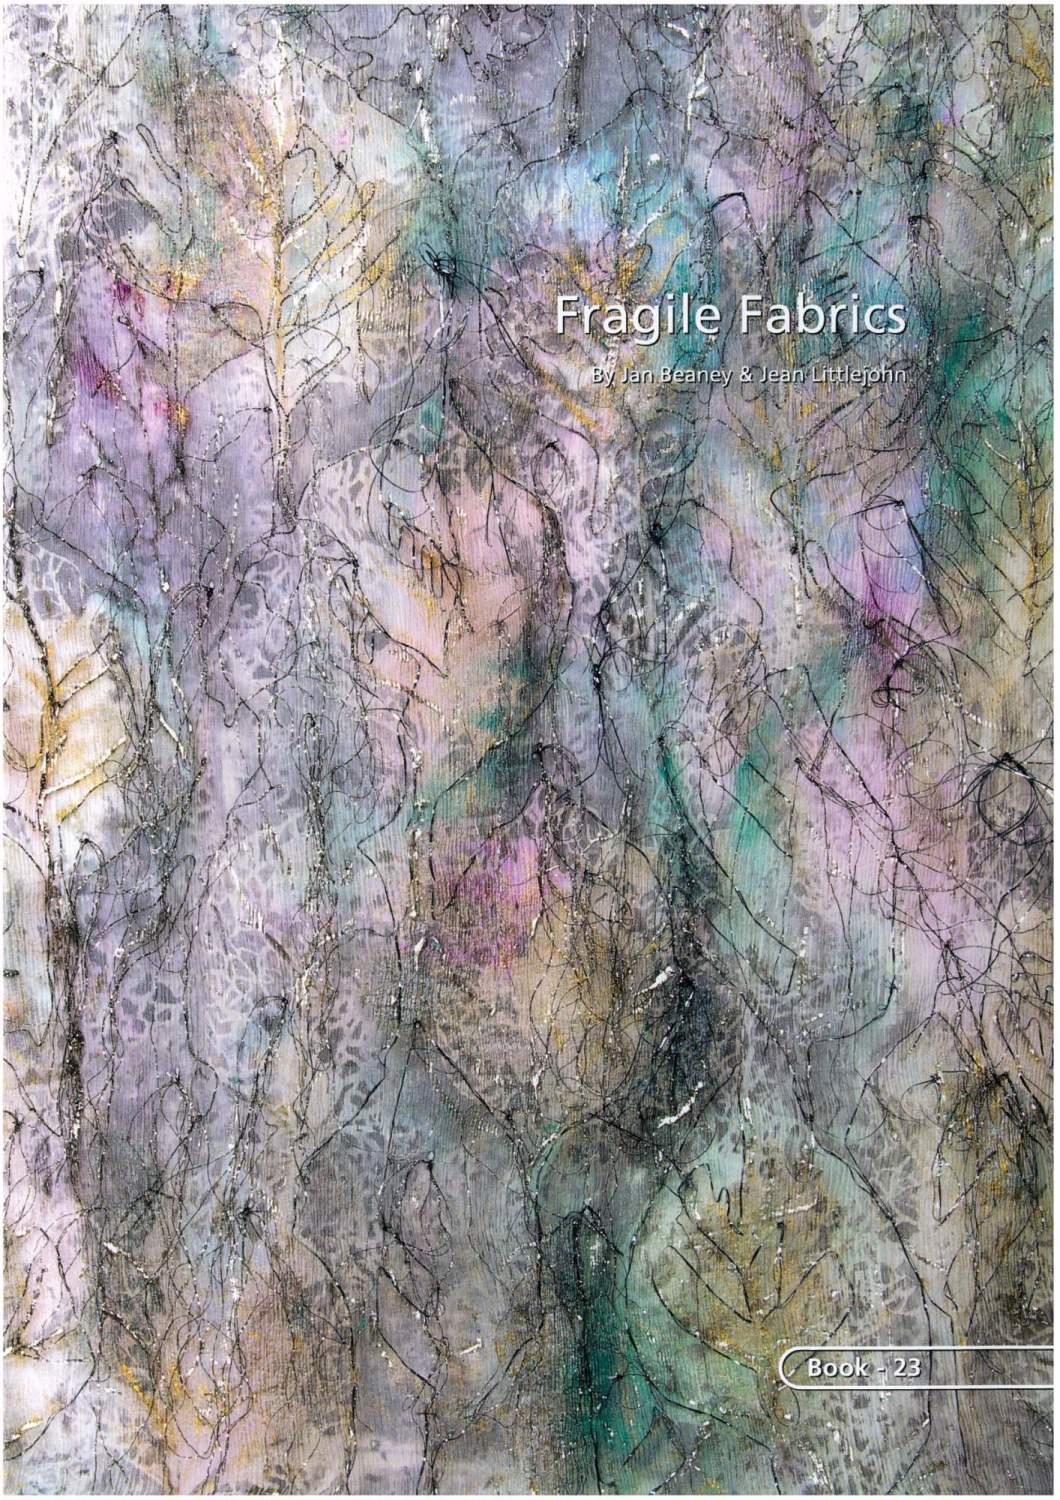 BOOK 23 – FRAGILE FABRICS. By Jan Beaney and Jean Littlejohn